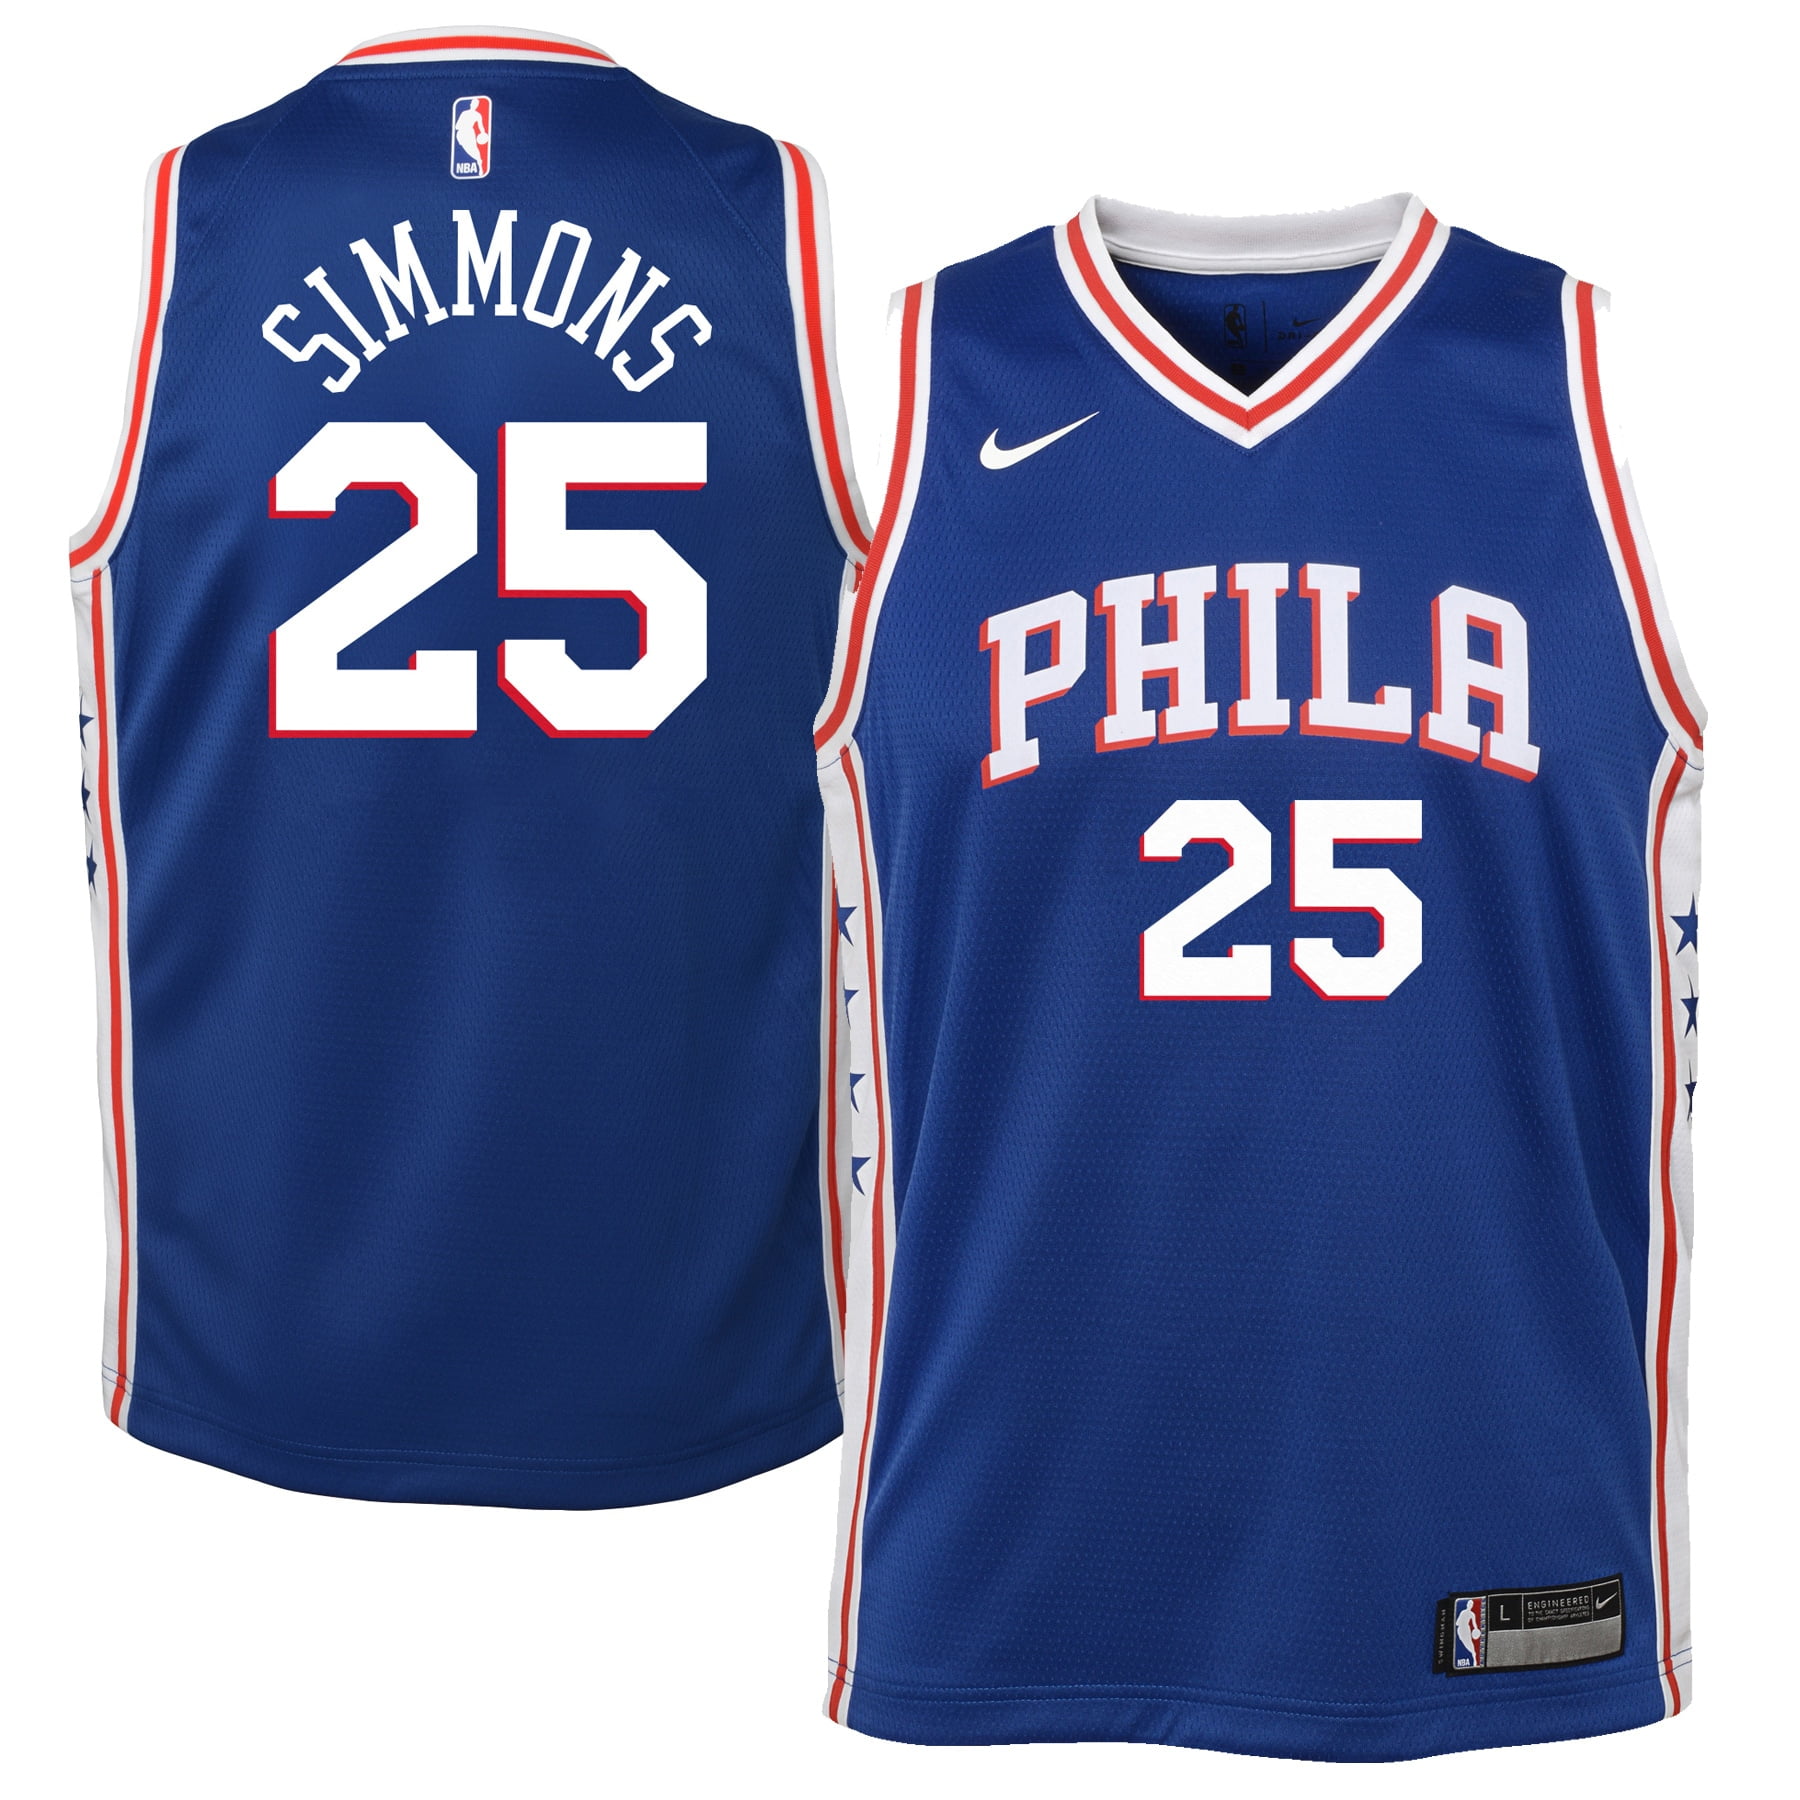 76ers new nike jersey